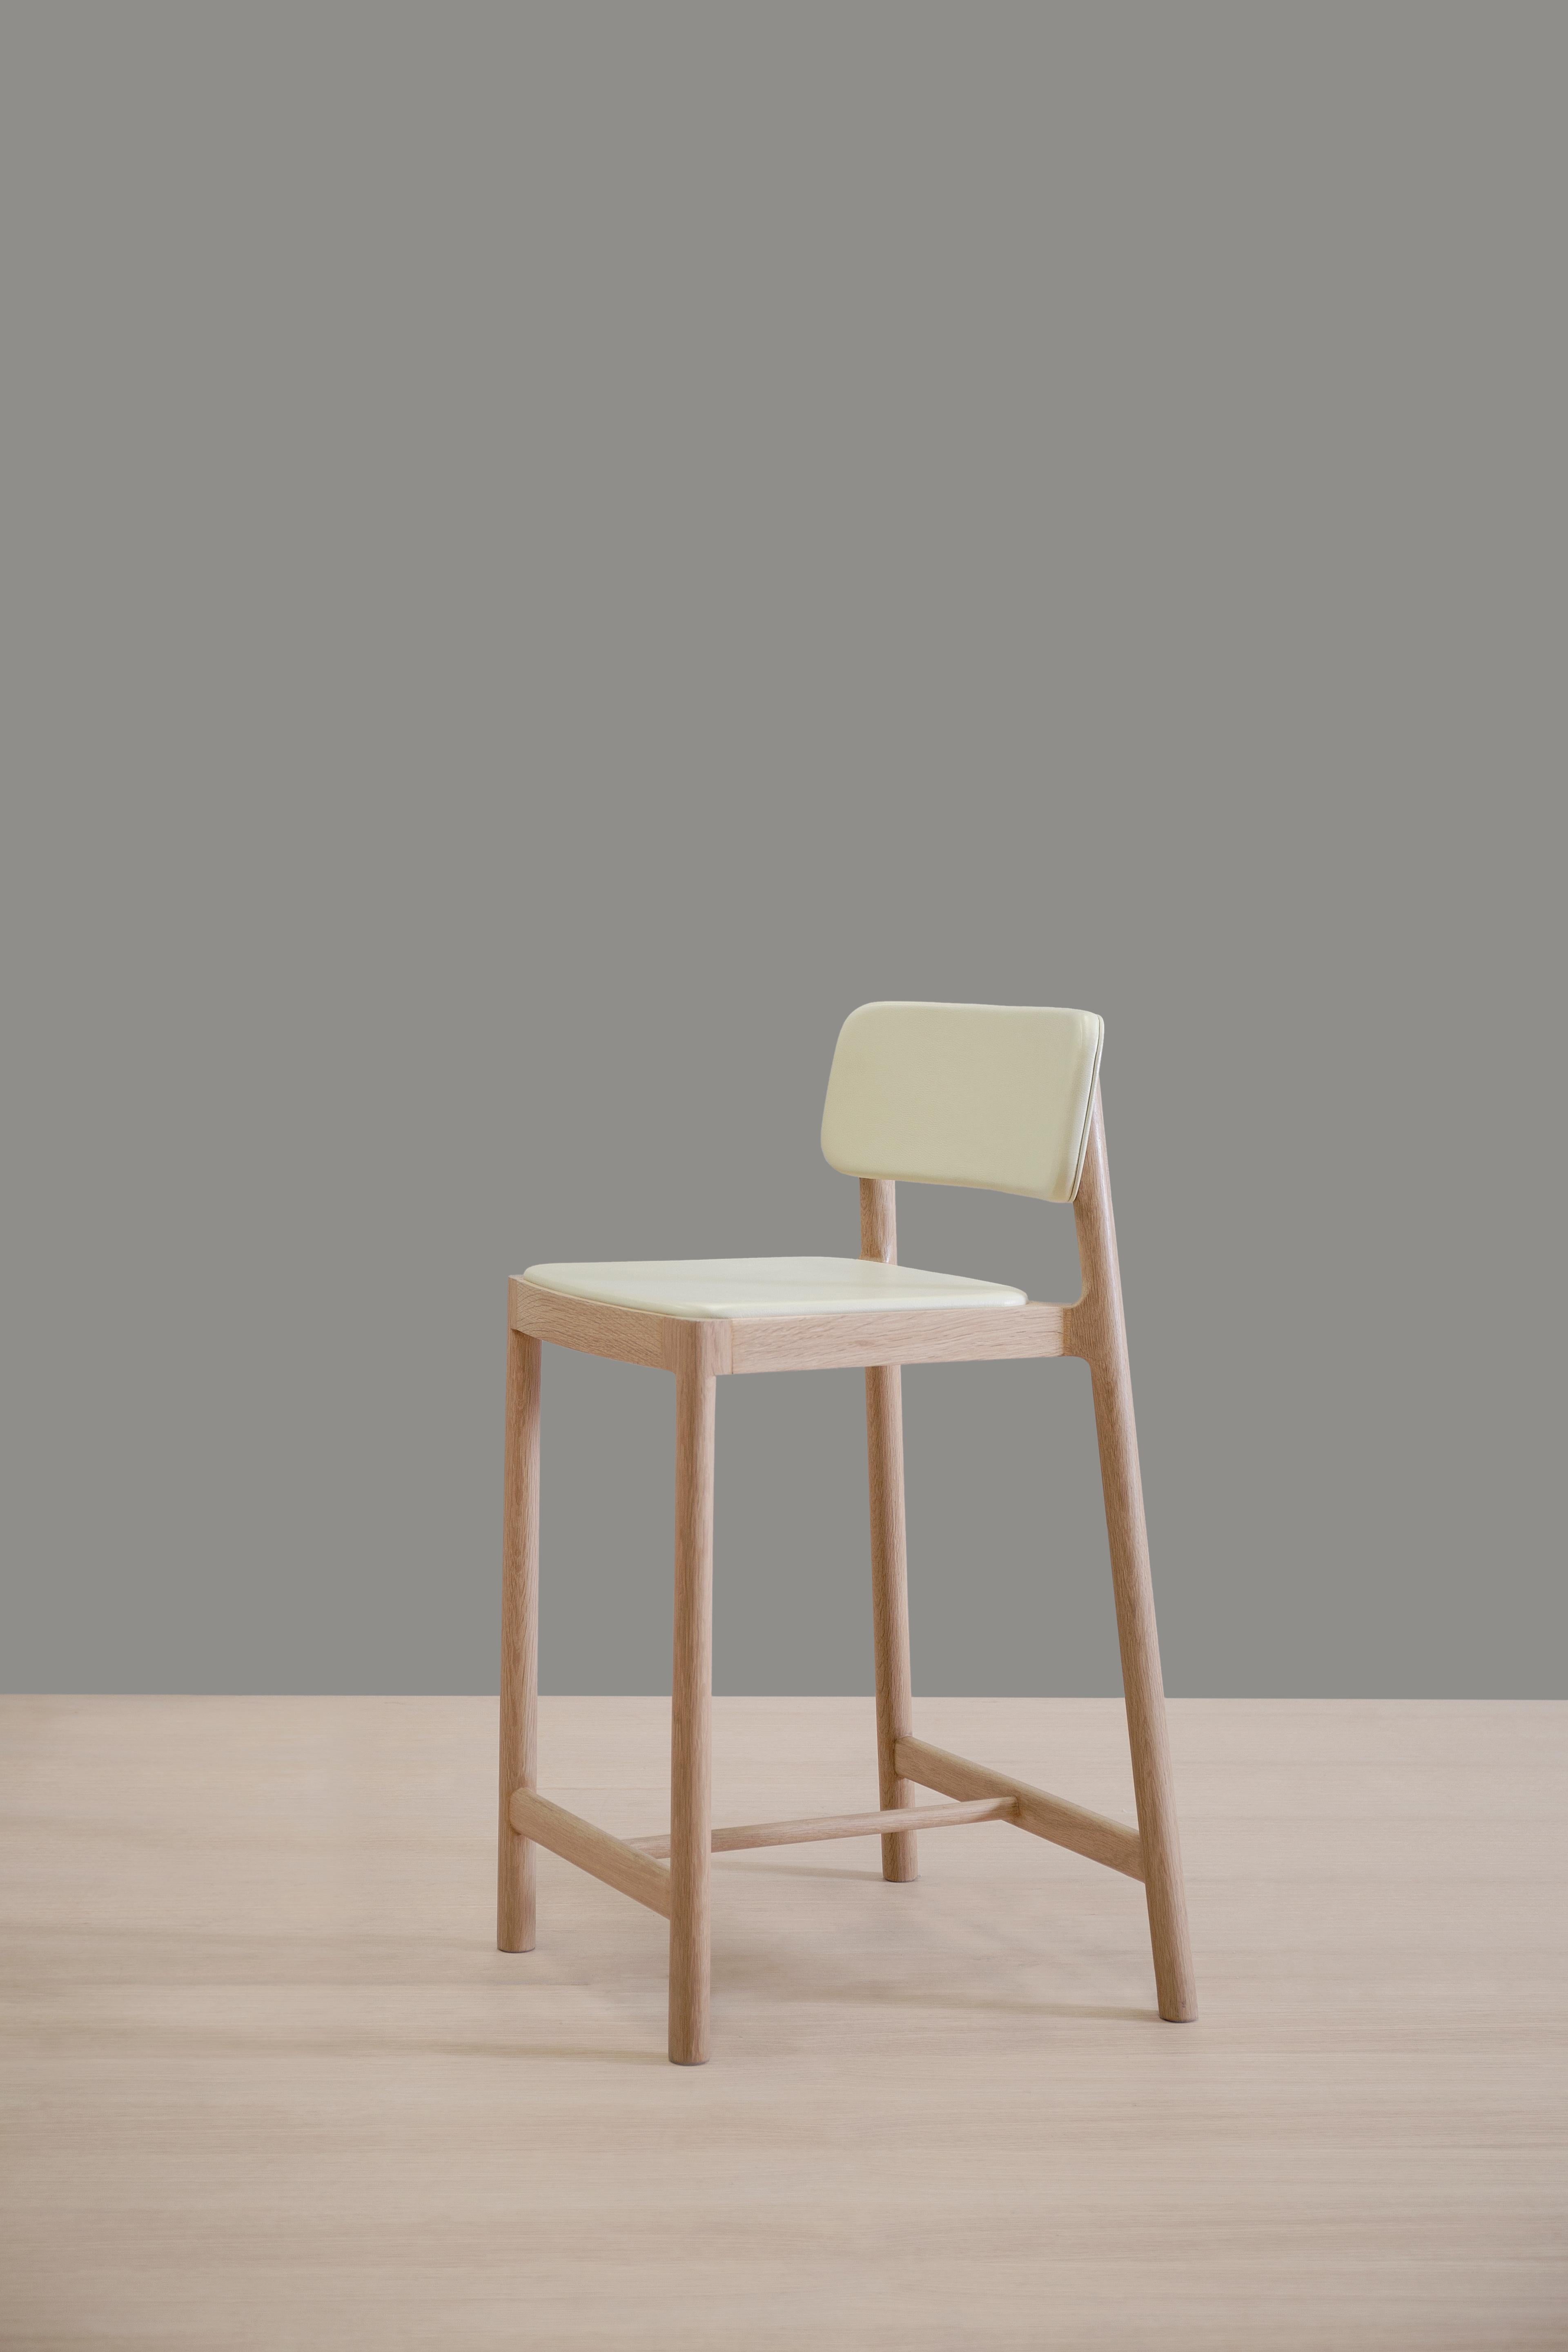 Linard barstool by Thai Hua
Dimensions: D 57 x W 48 x H 91 cm
Materials: oak wood, leather.

Solid holm white oak and bone leather stool.

Thai Hua is an industrial designer originally from Vietnam trained in Switzerland. Since 2003 Thai Hua